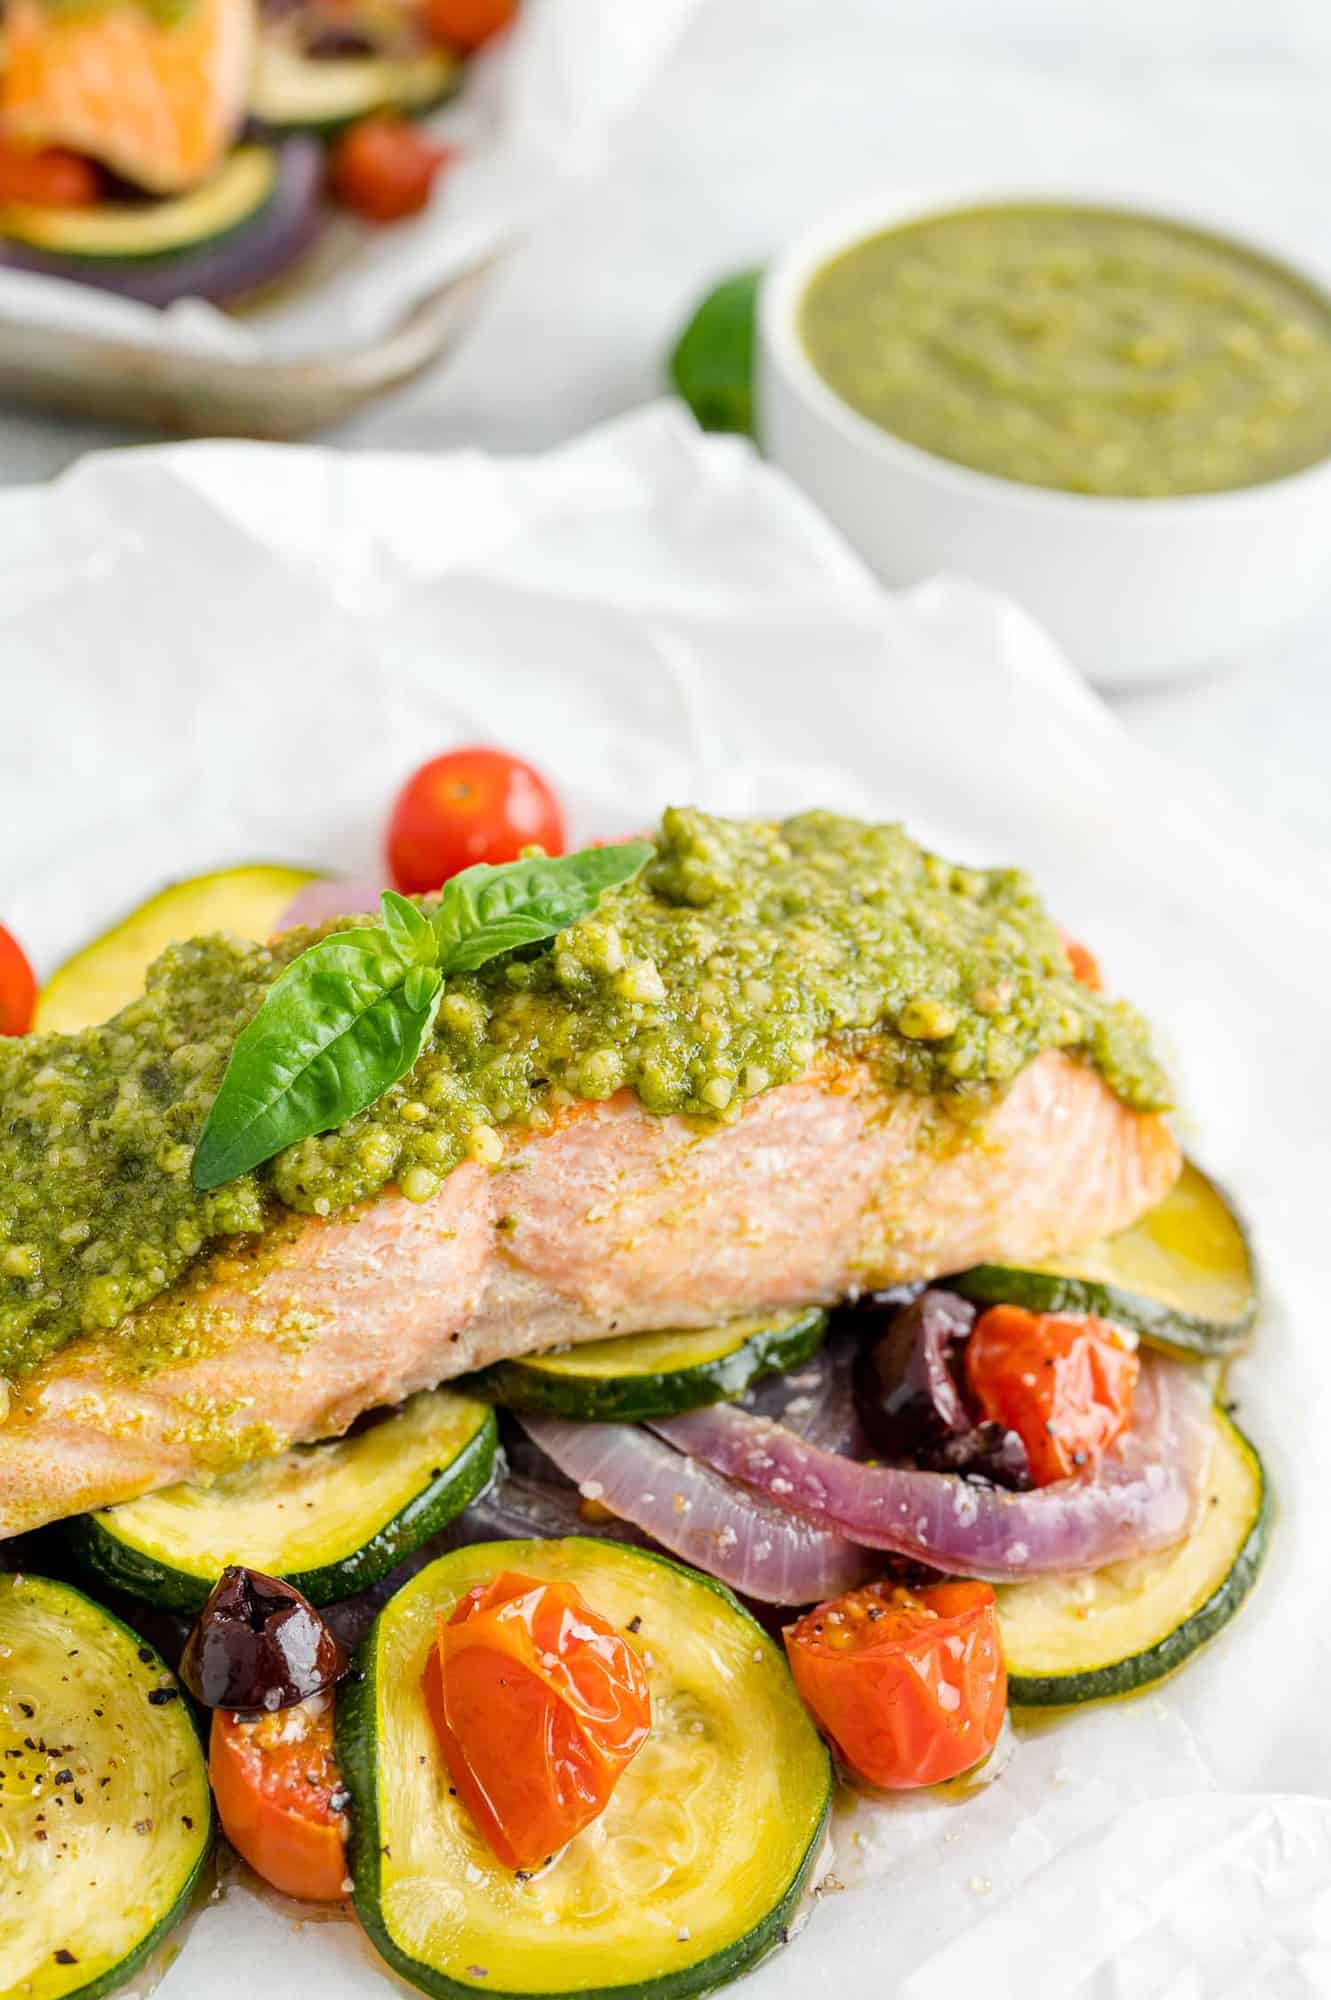 Pesto salmon with vegetables in parchment paper.